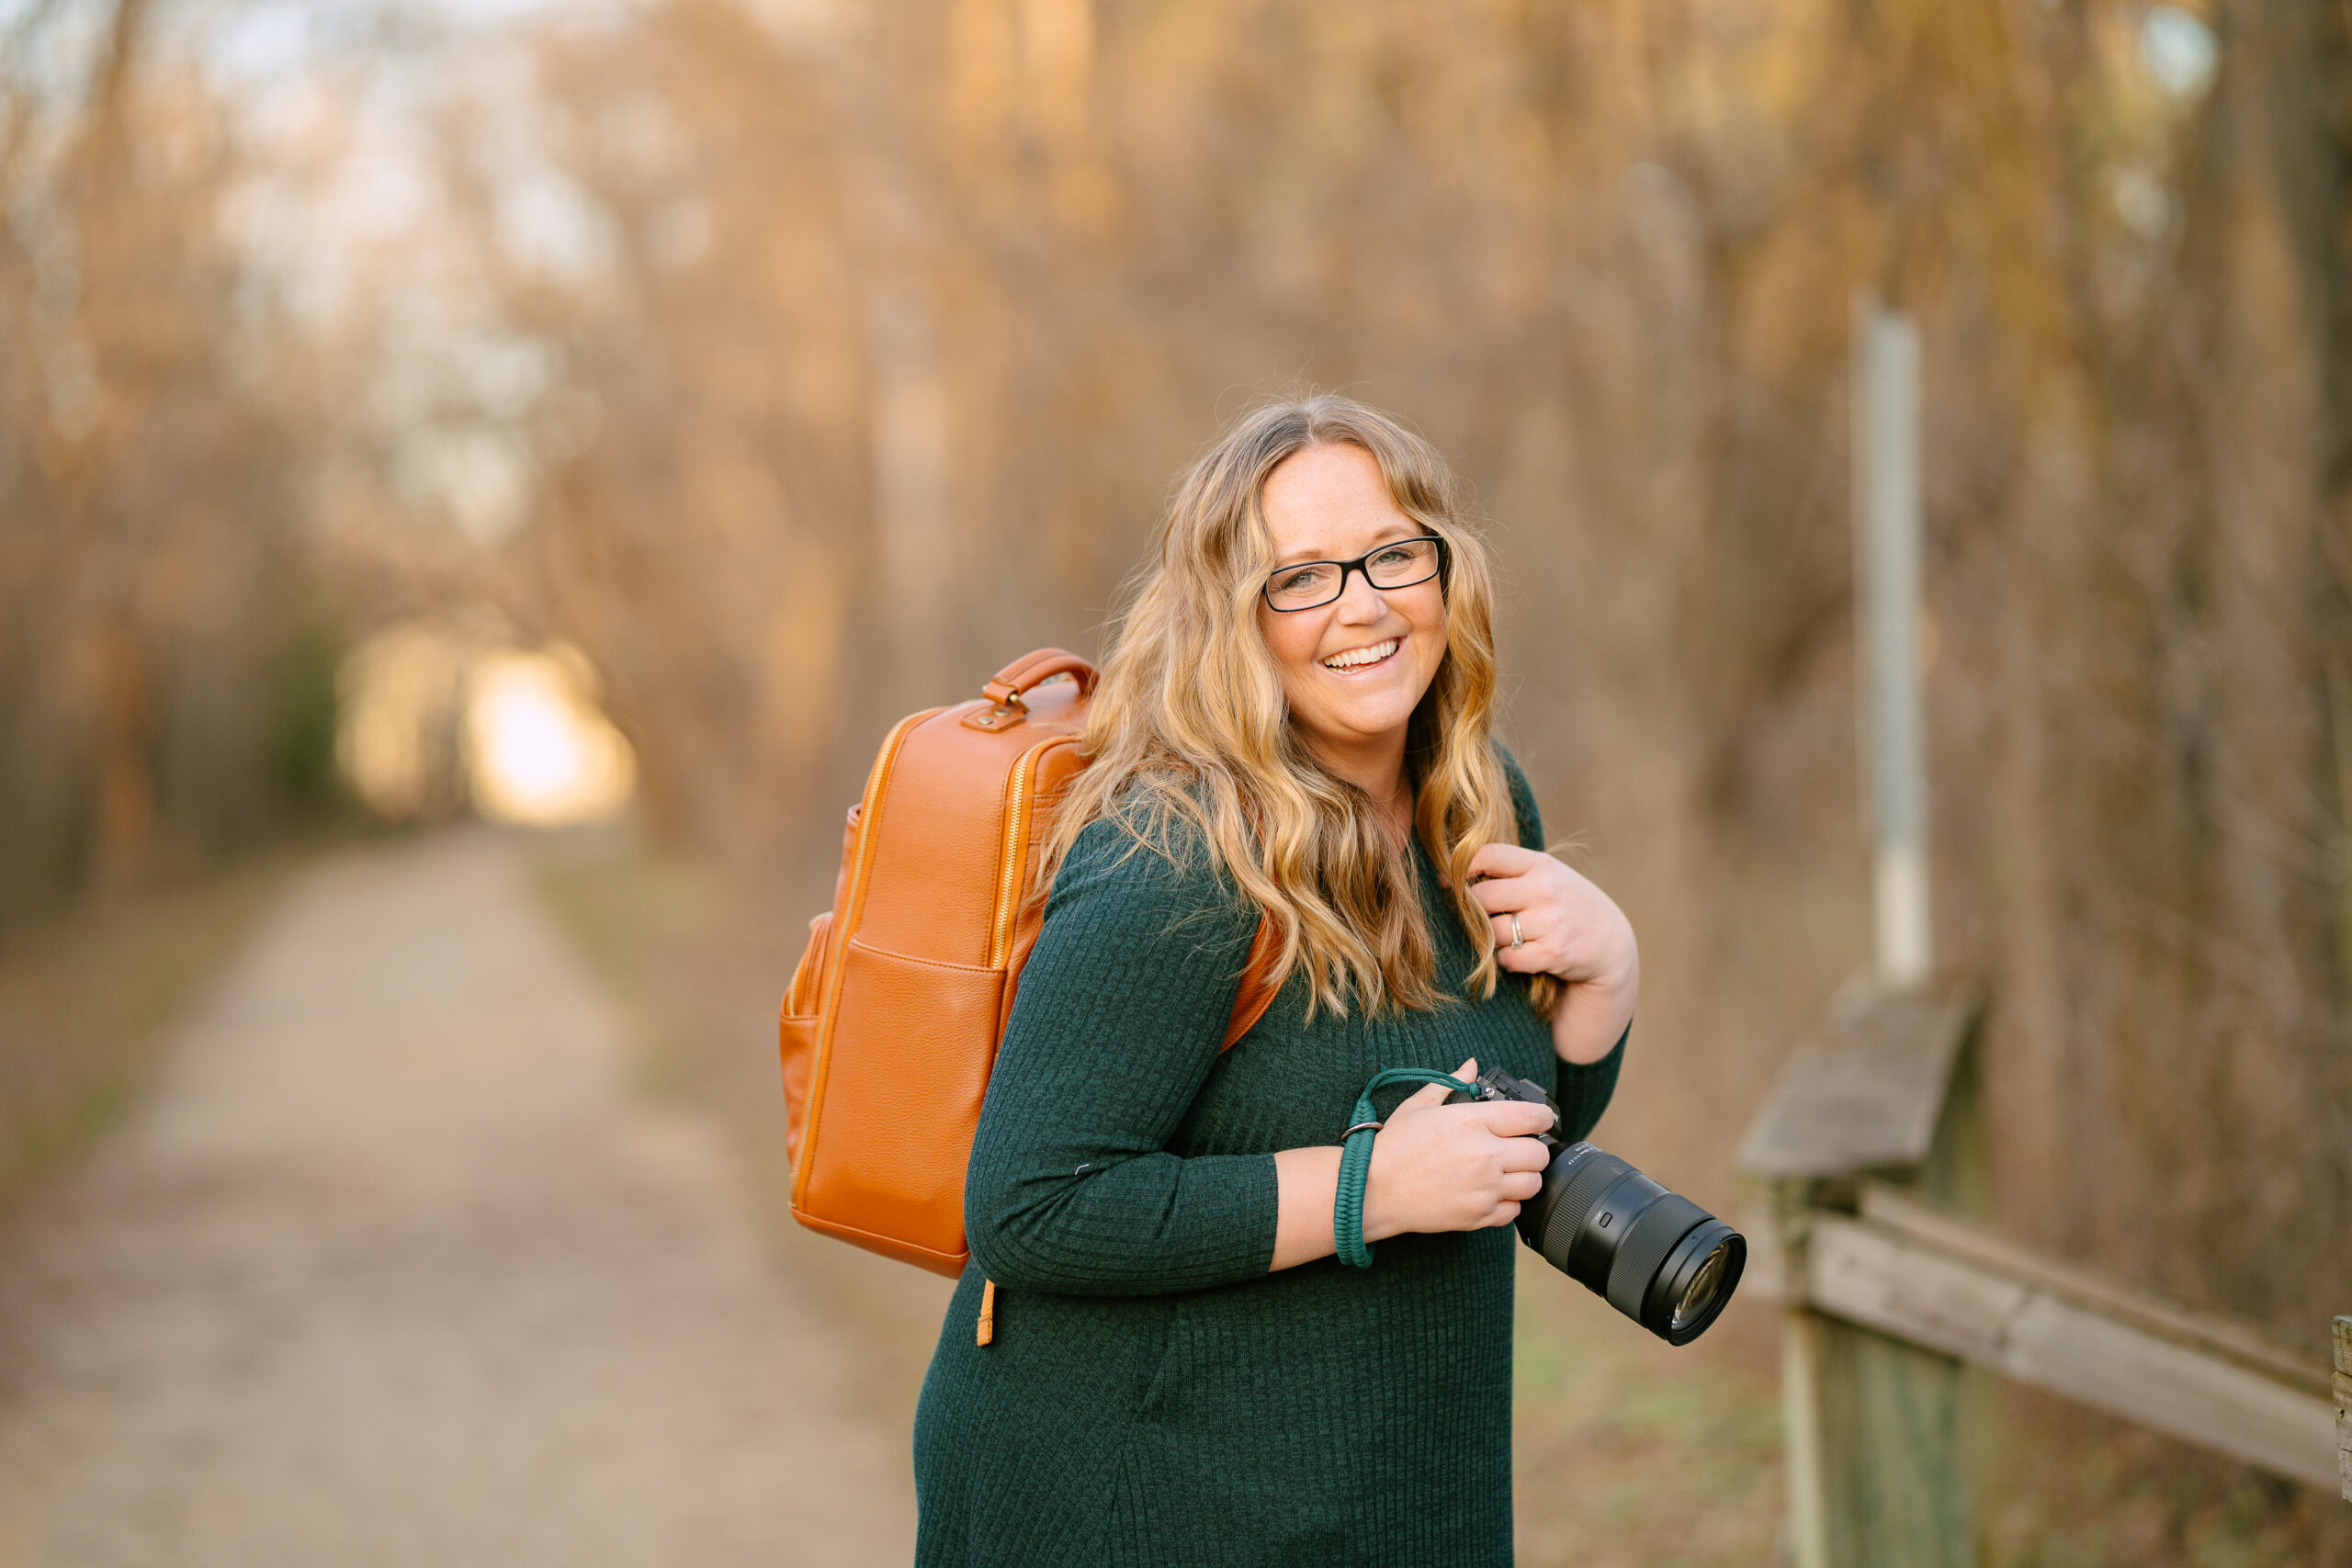 A woman in a green dress carries a camera and wears a caramel colored backpack